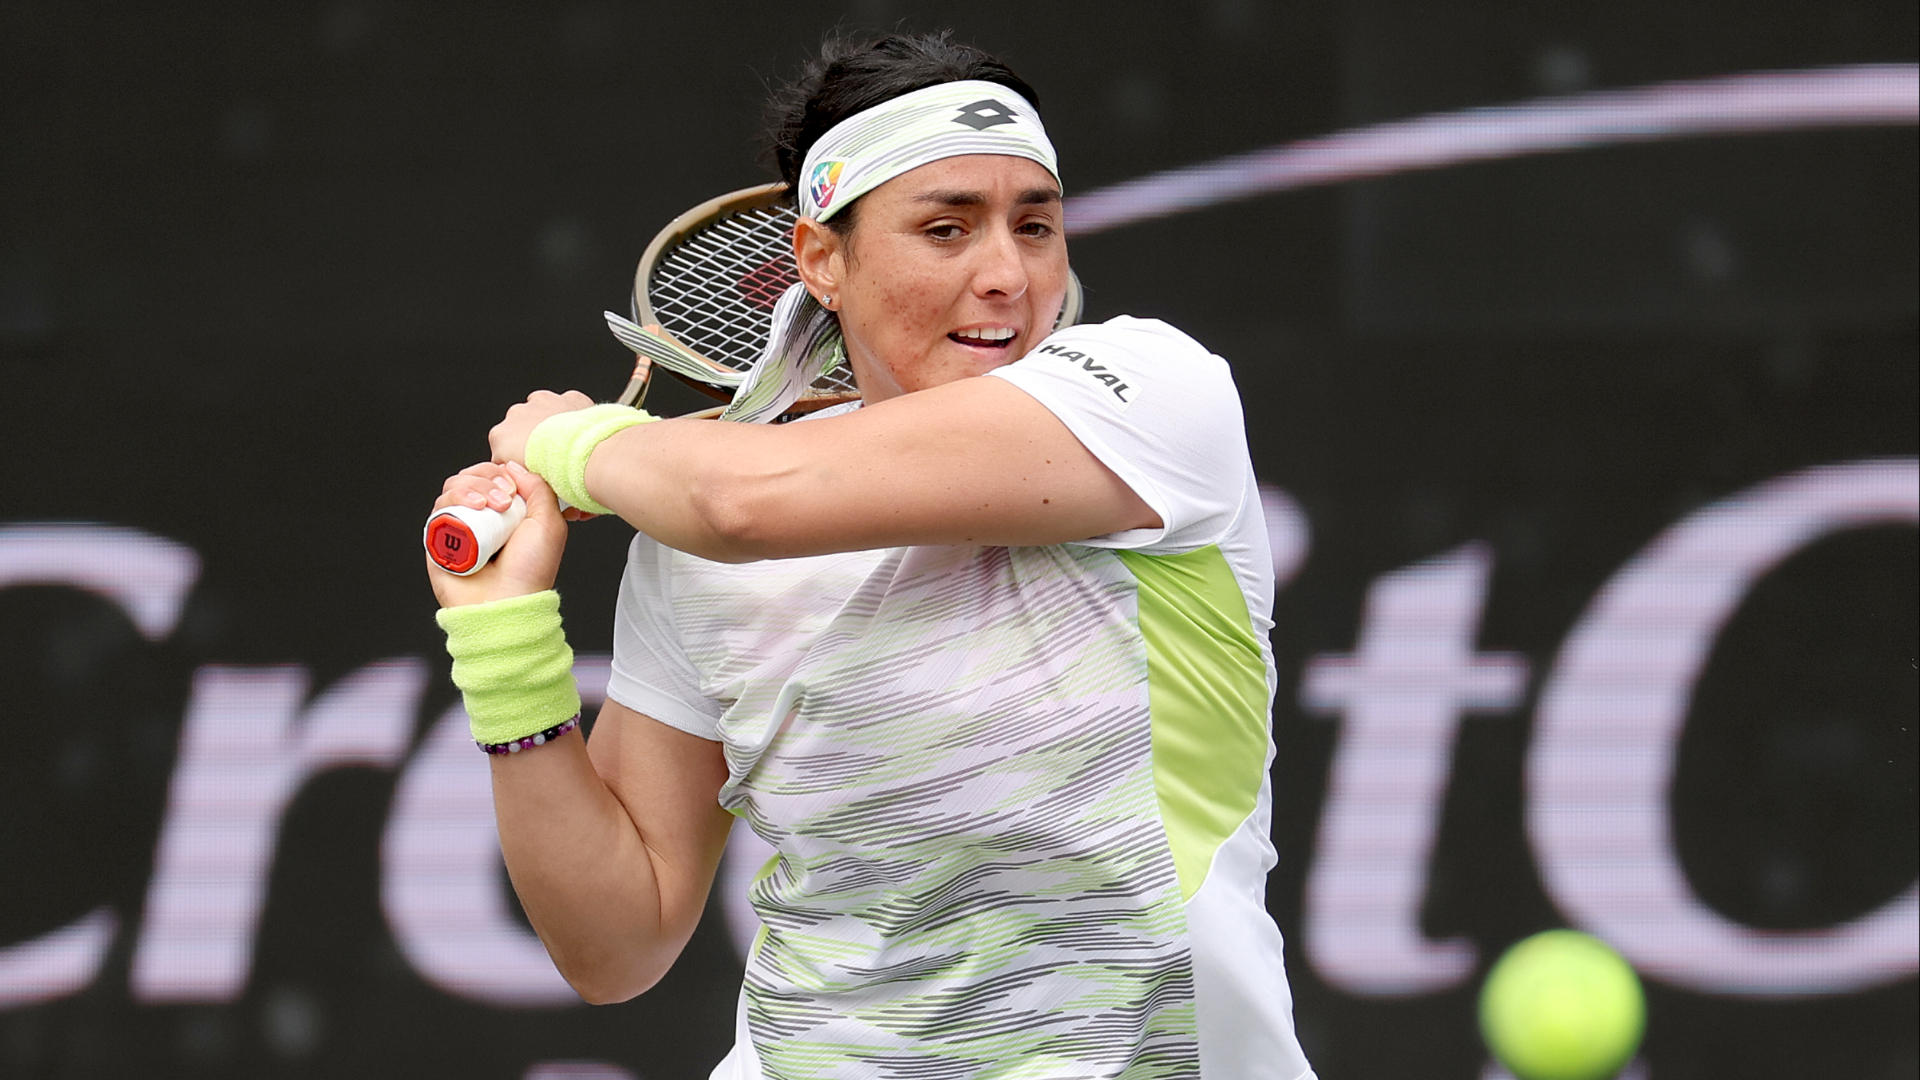 Jabeur beats Bencic to land her first WTA titl beIN SPORTS